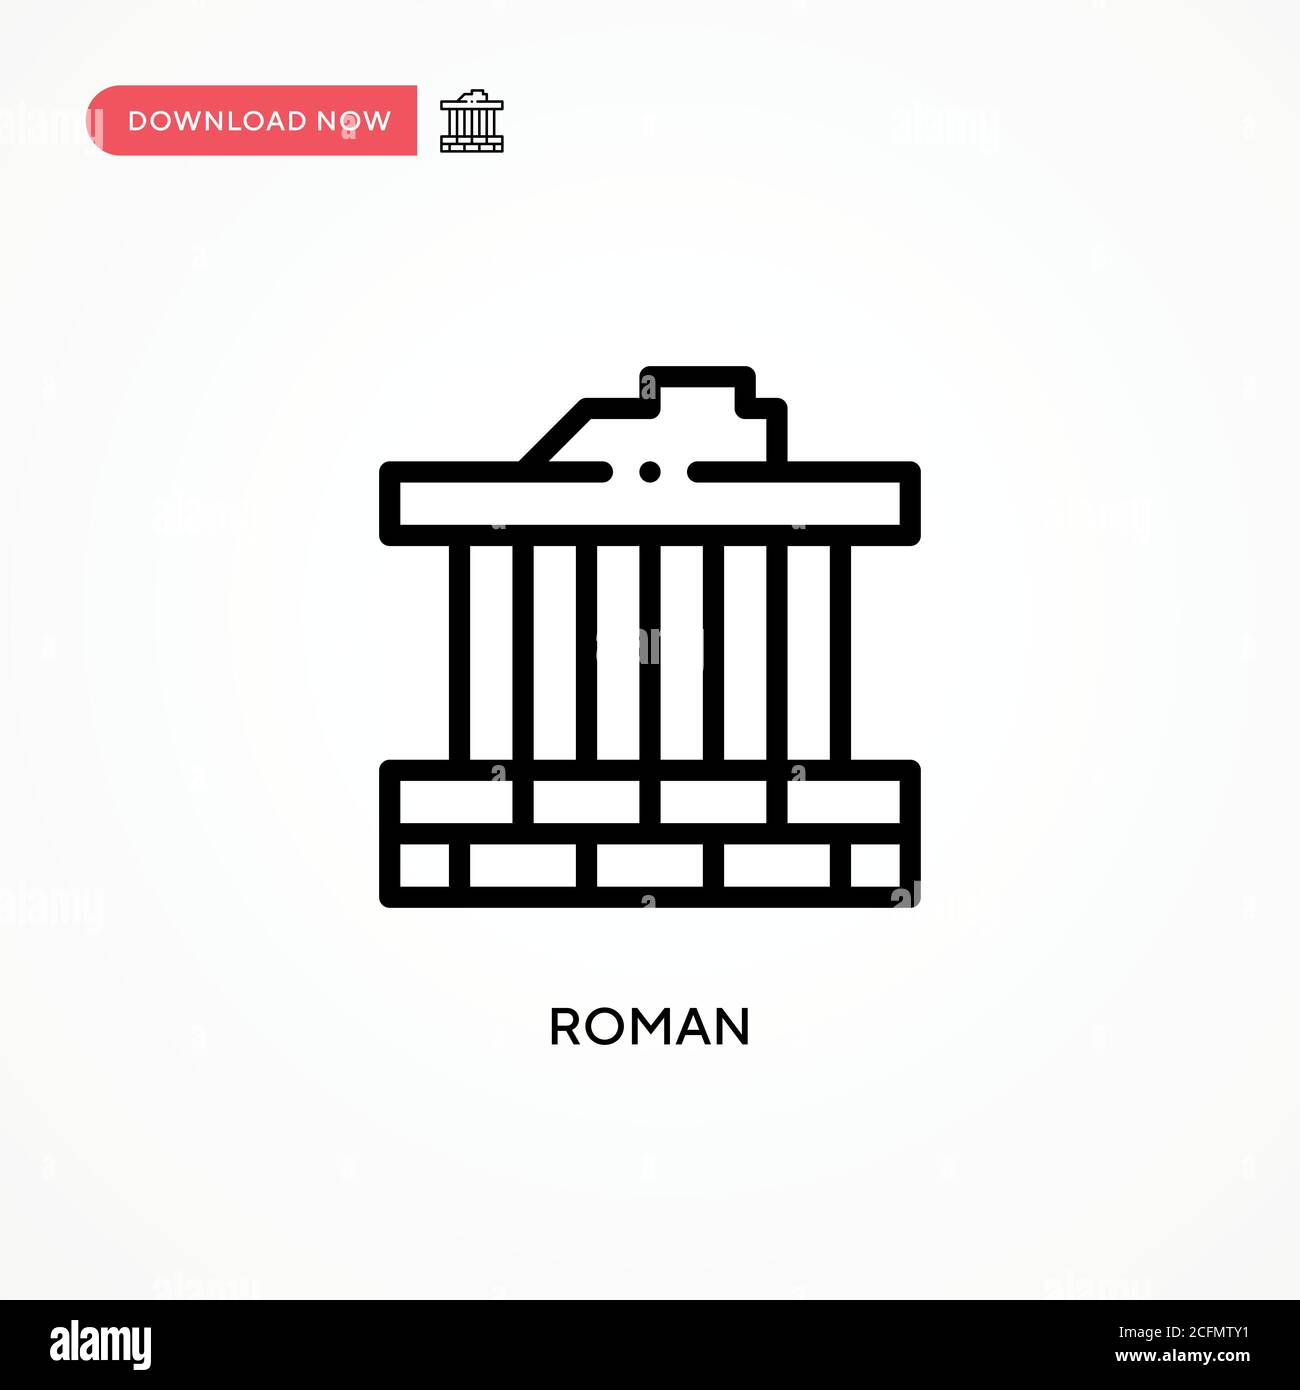 Roman vector icon. Modern, simple flat vector illustration for web site or mobile app Stock Vector